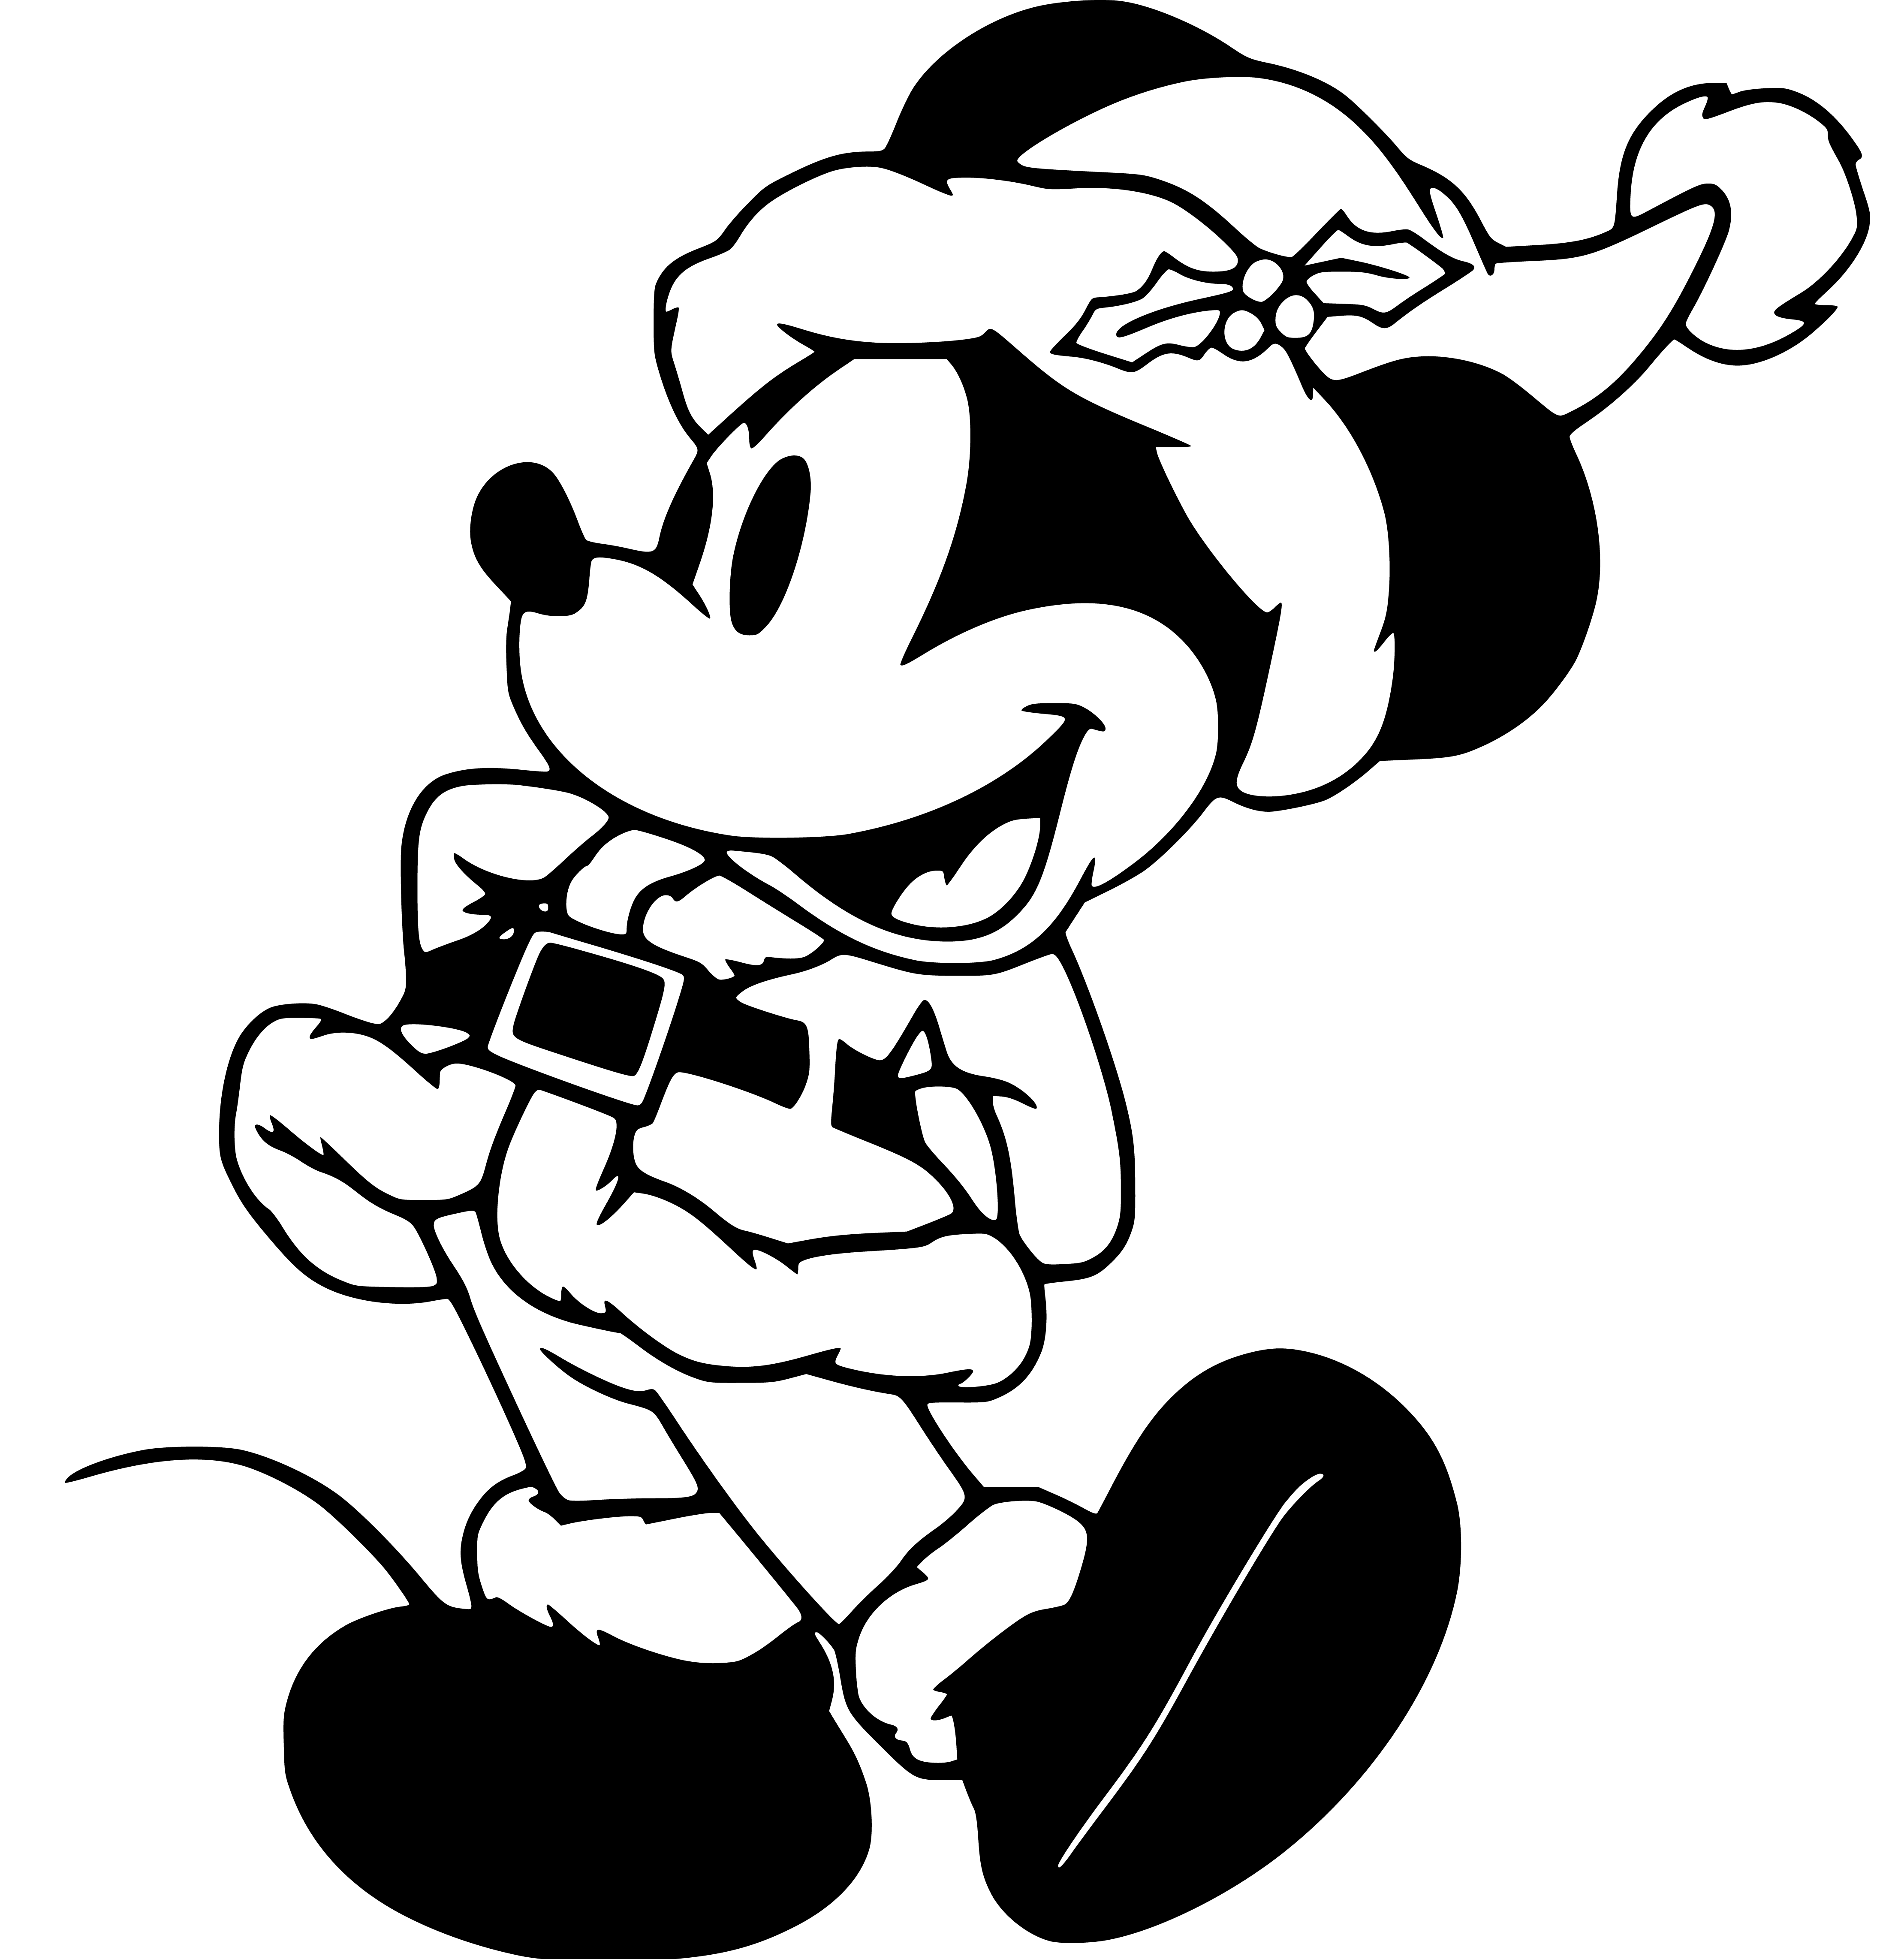 Printable Mickey Mouse Sketch Coloring Page for kids.